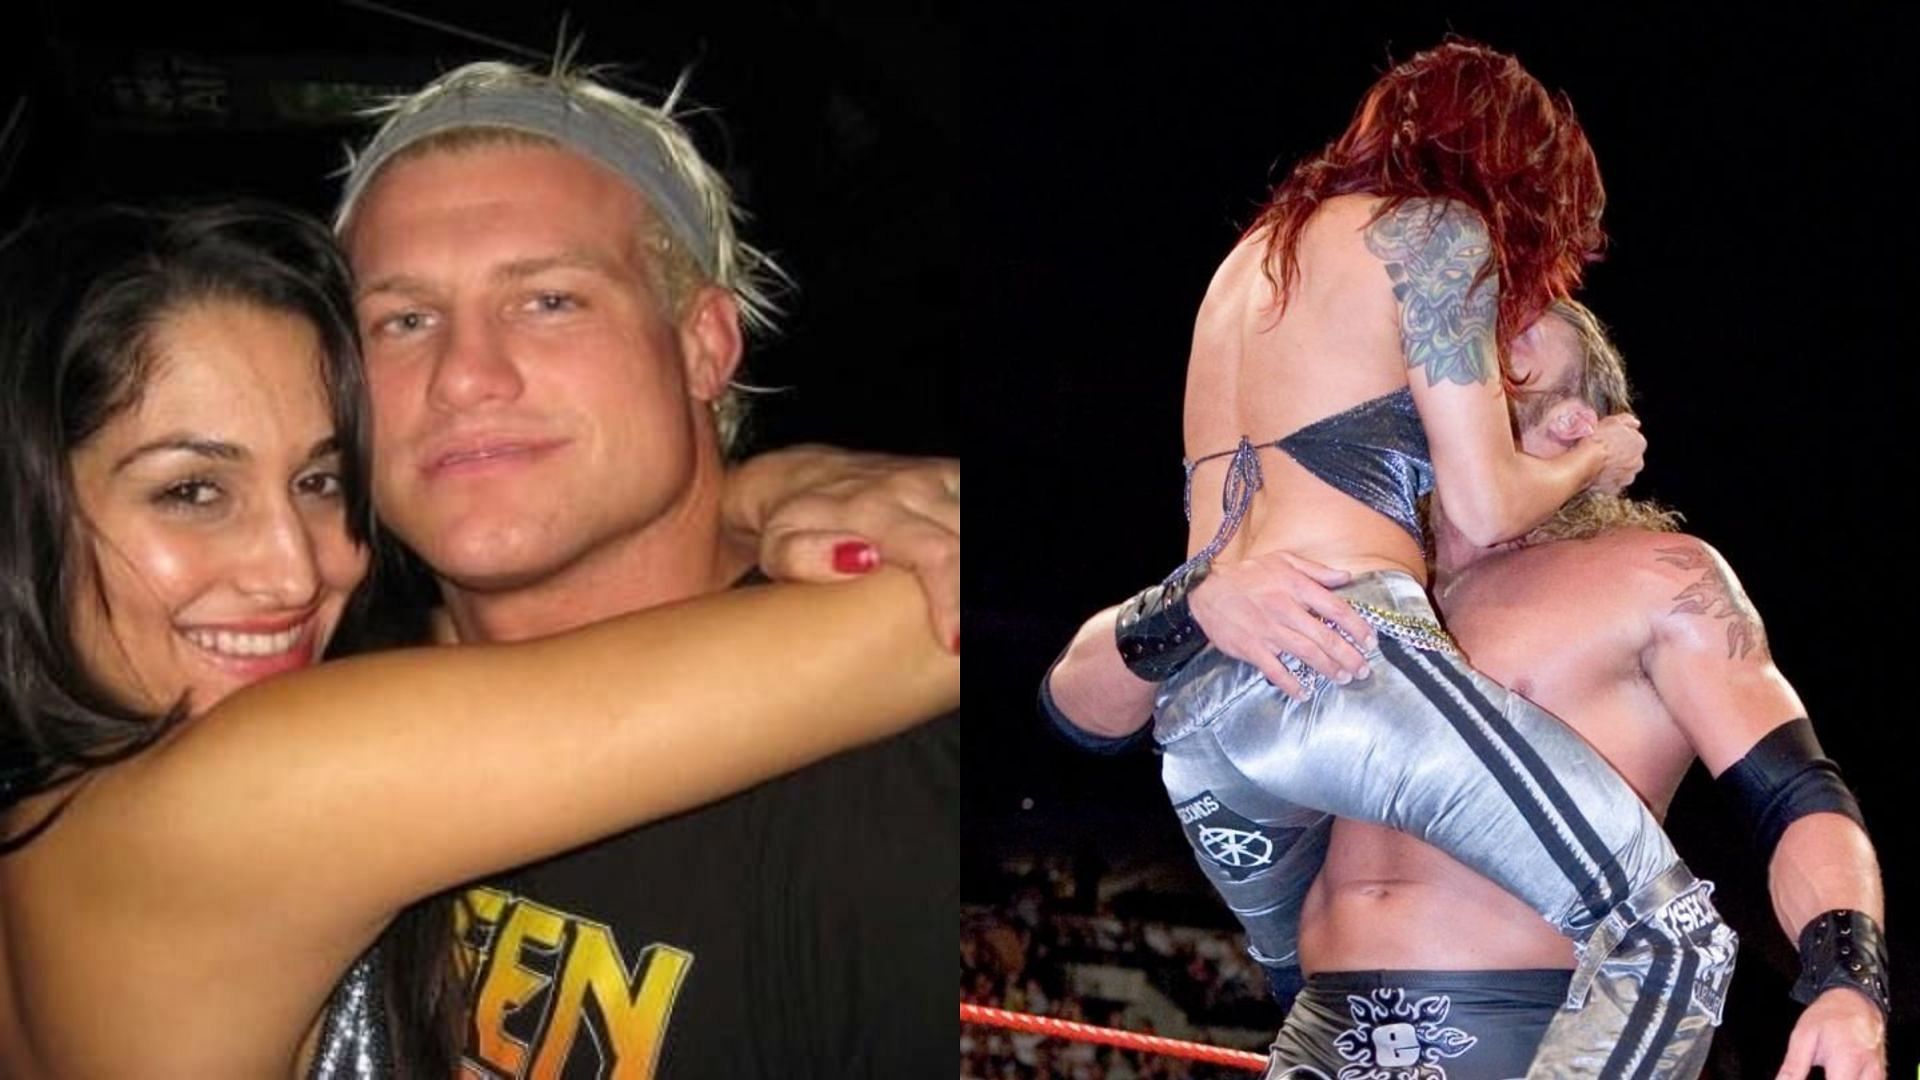 Dolph Ziggler with Nikki Bella (left) and Edge with Lita (right) .